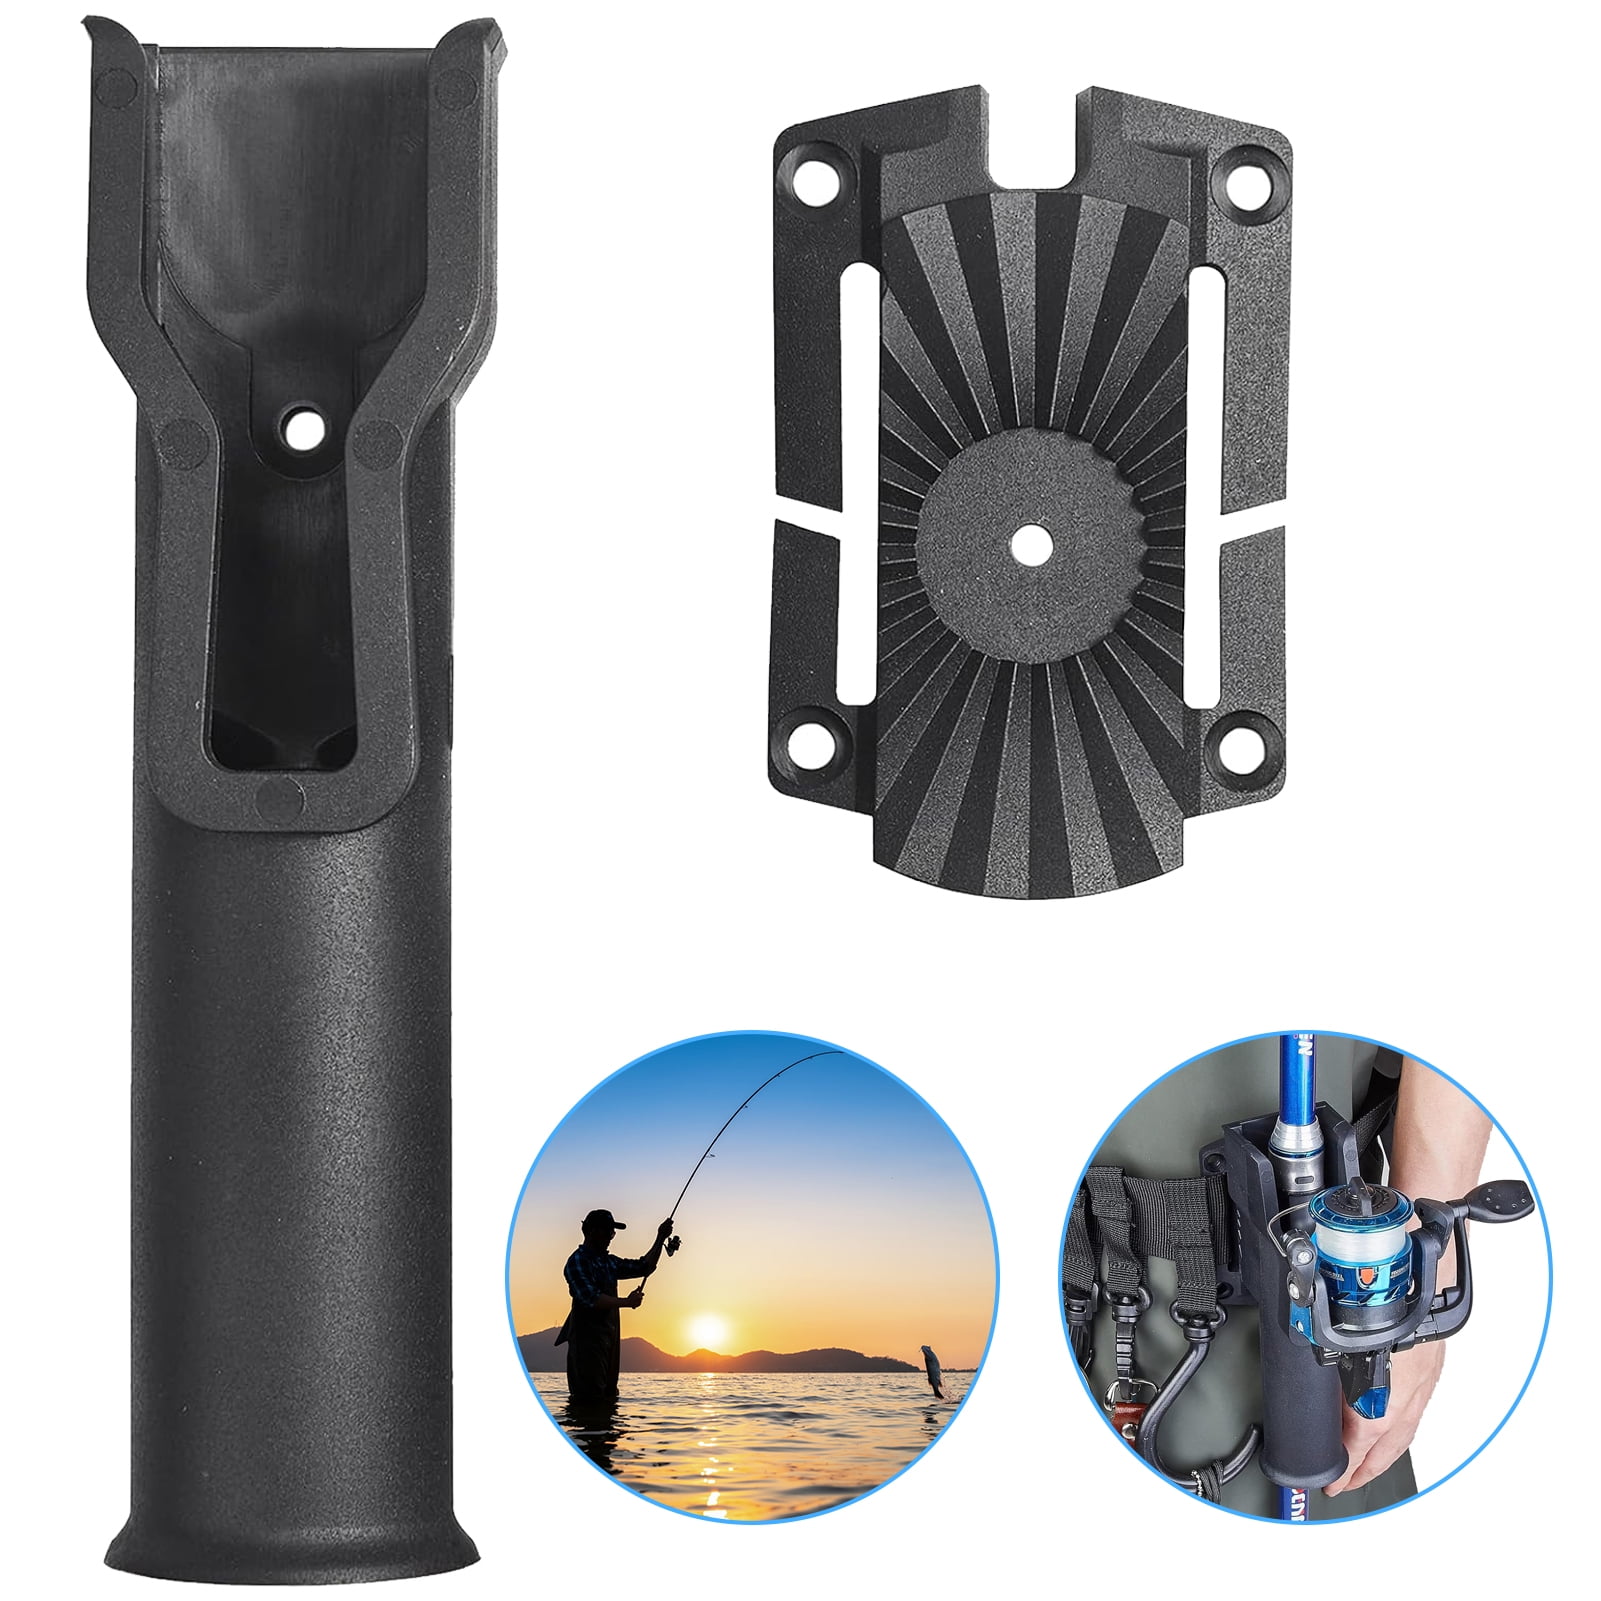 🎣 Sand Flea Surf Fishing Rod Holder Beach Sand Spike. 2, 3 or 4 Foot  Lengths. Made from Impact and UV Resistant PVC. 100% USA Made🗽.